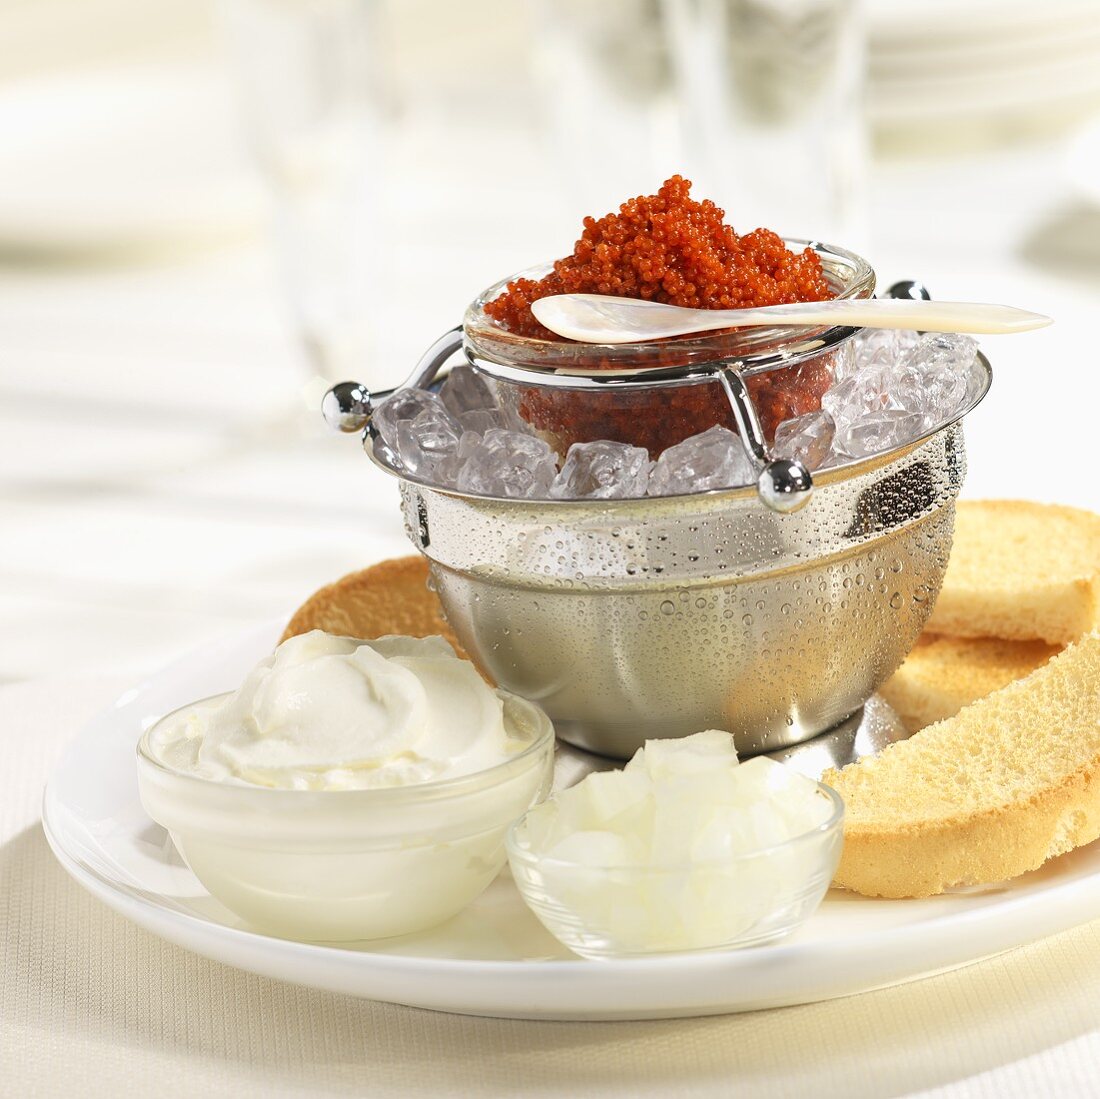 Red Caviar on Ice with Toast Points, Sour Cream and Onions